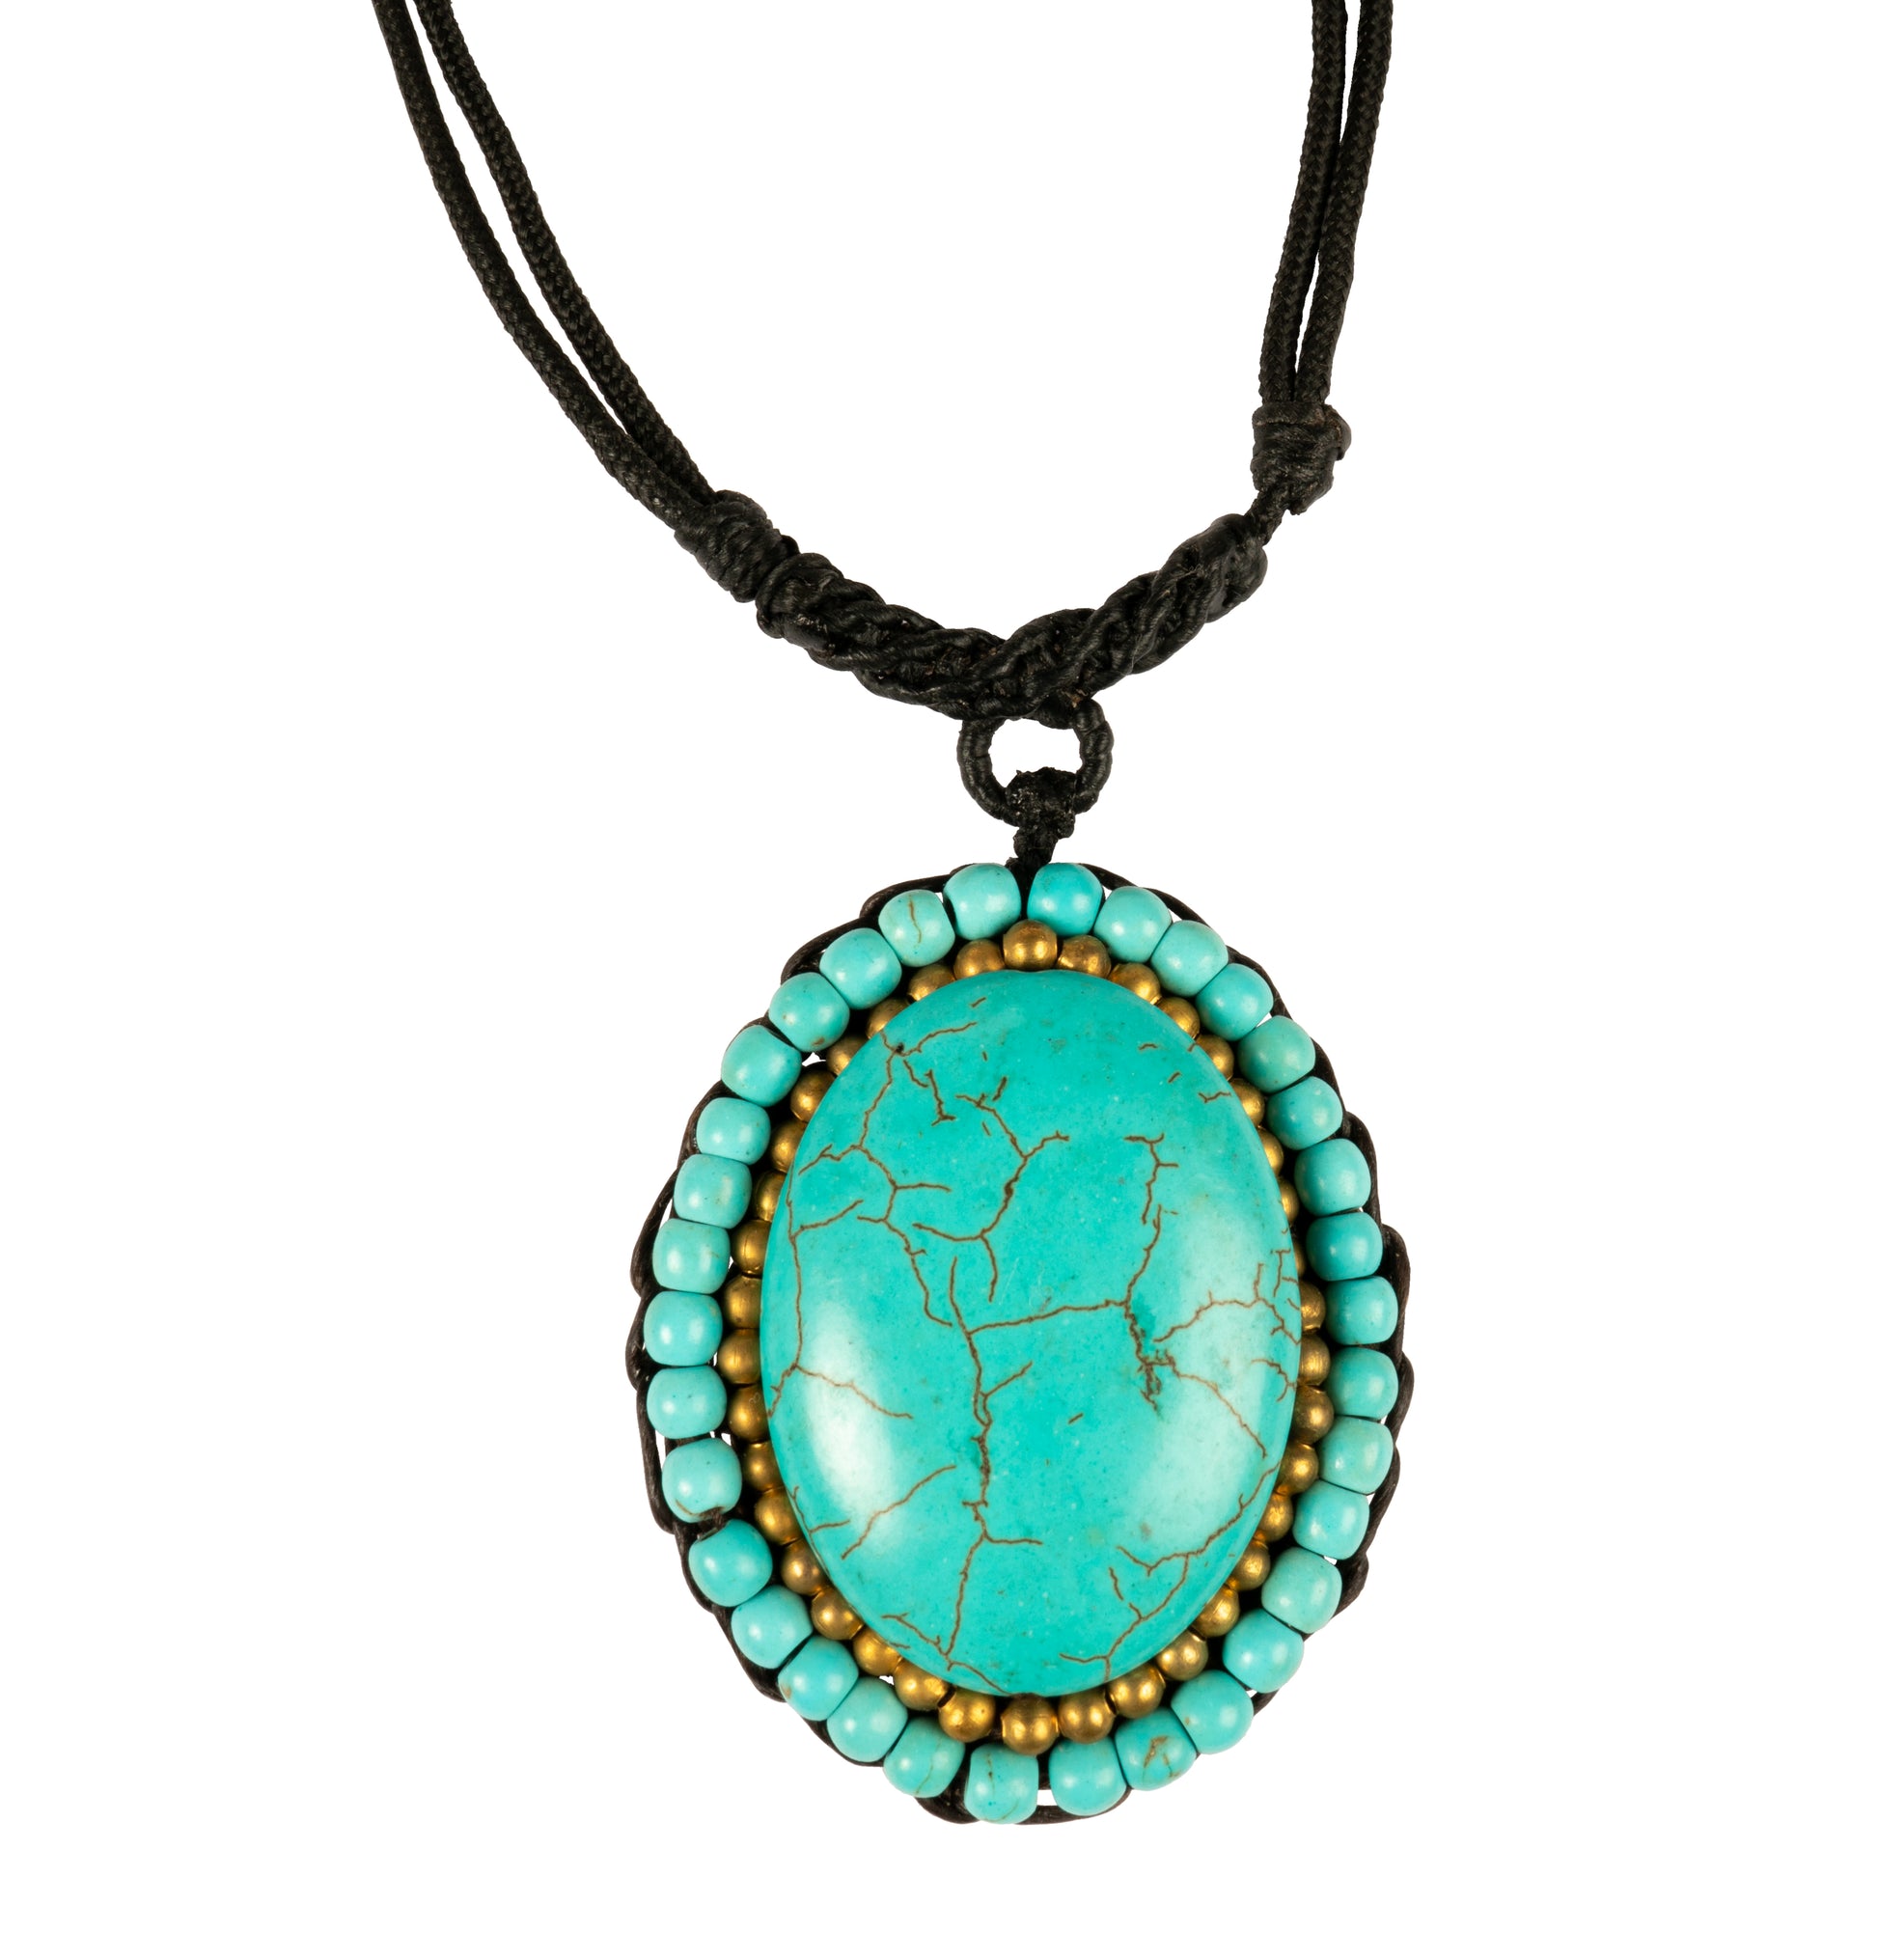 Nylon Necklace with Stone Oval Turquoise, Modern Boho Jewelry, Summer Fashion - CCCollections